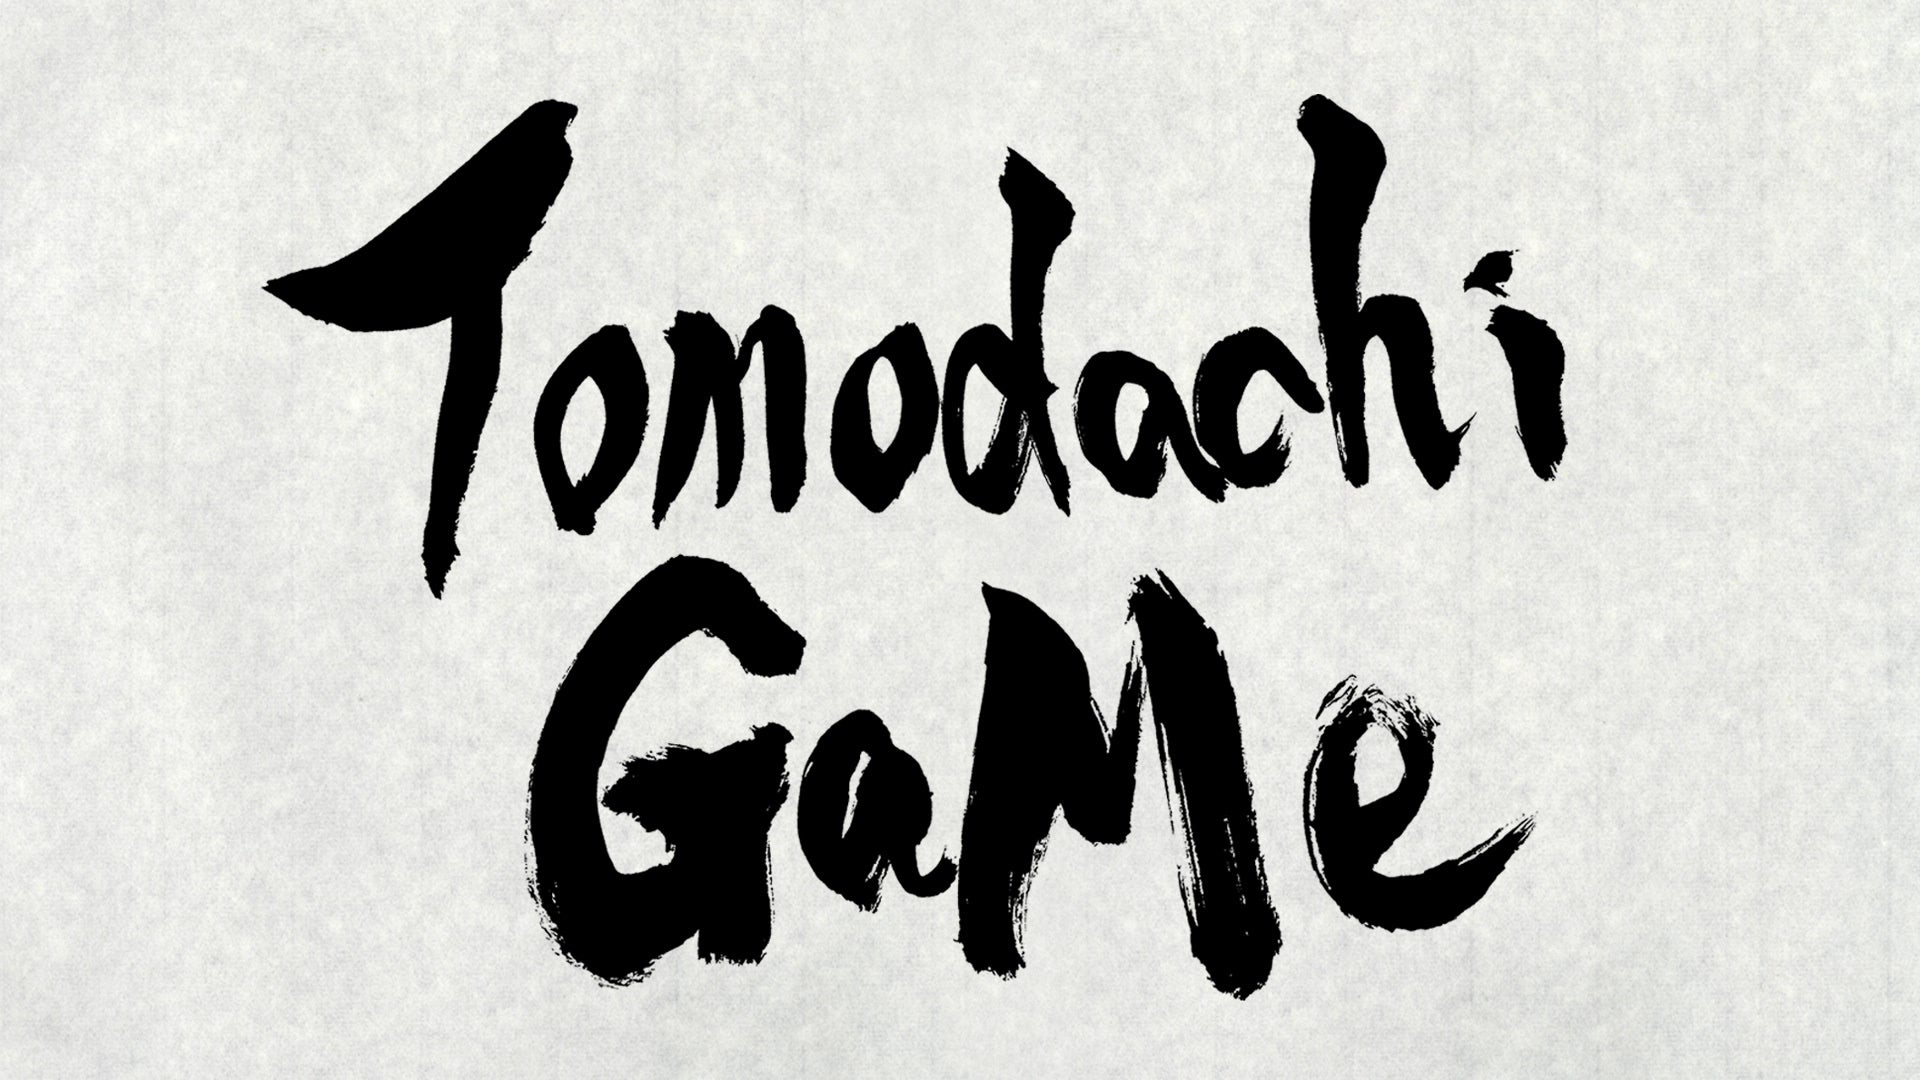 The Most Interesting Thing About Tomodachi Game, Anime Version of Squid Game